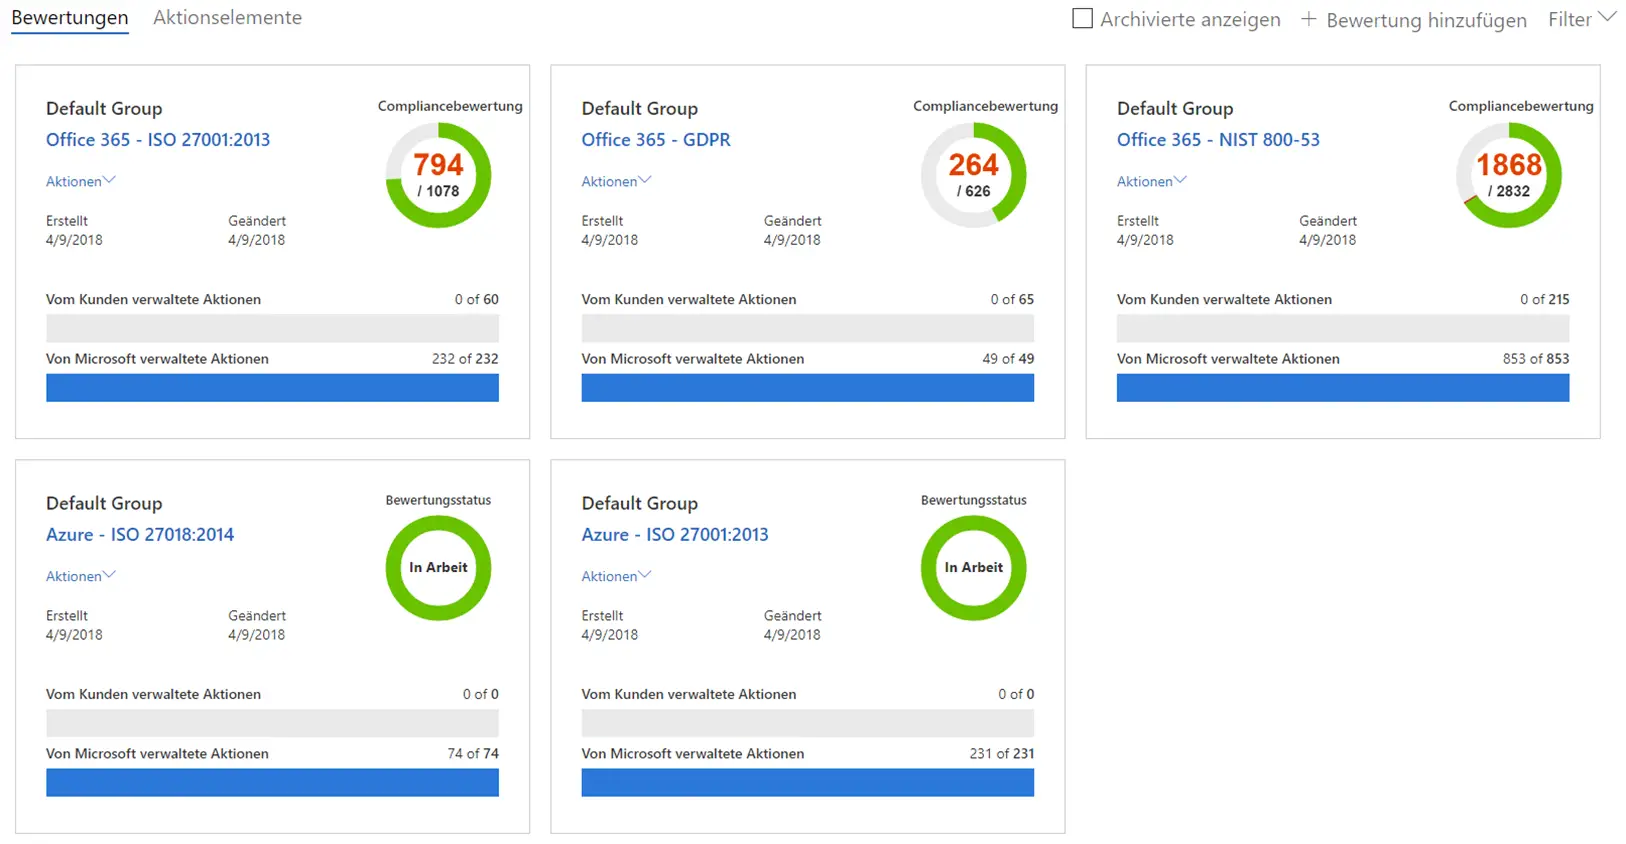 Overview of the Compliance Manager. Source: Screenshot Microsoft.com 